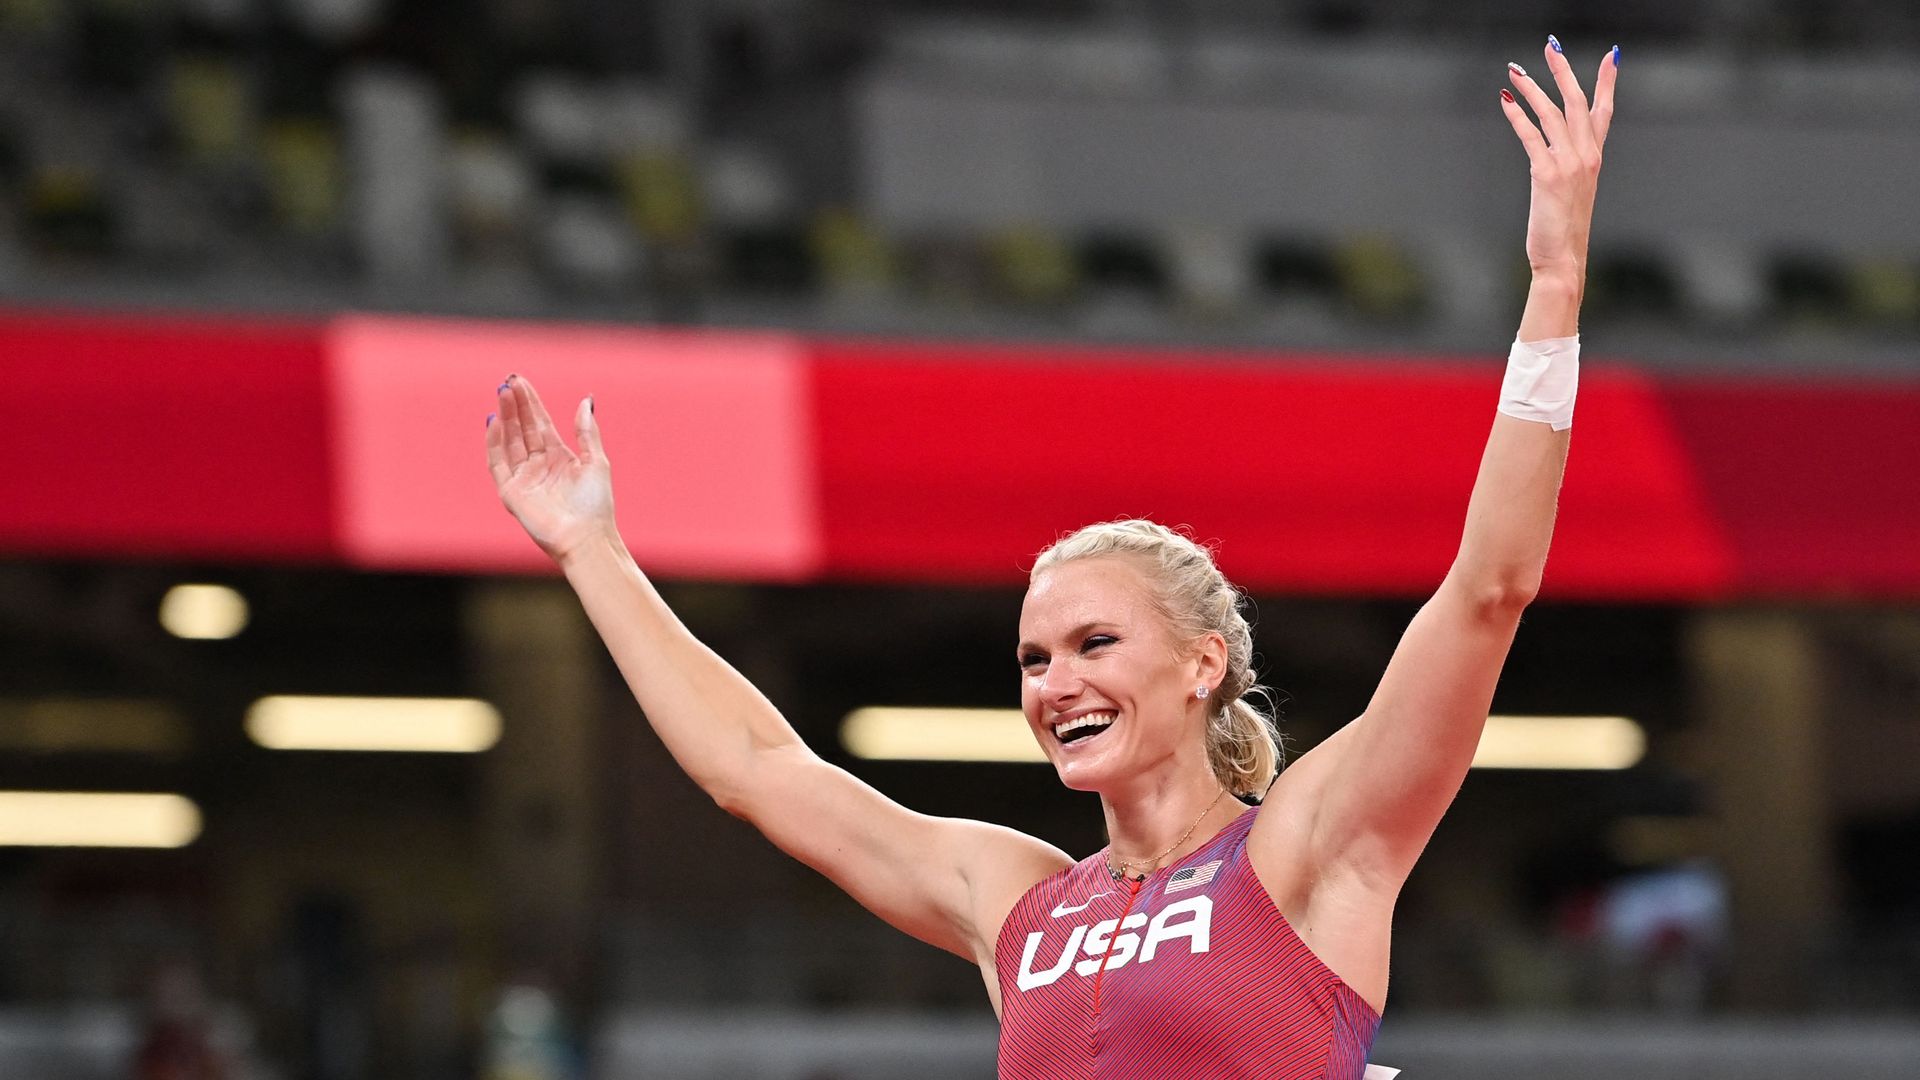 USA's Katie Nageotte celebrates after winning the women's pole vault final during the Tokyo 2020 Olympic Games at the Olympic Stadium in Tokyo on August 5, 2021